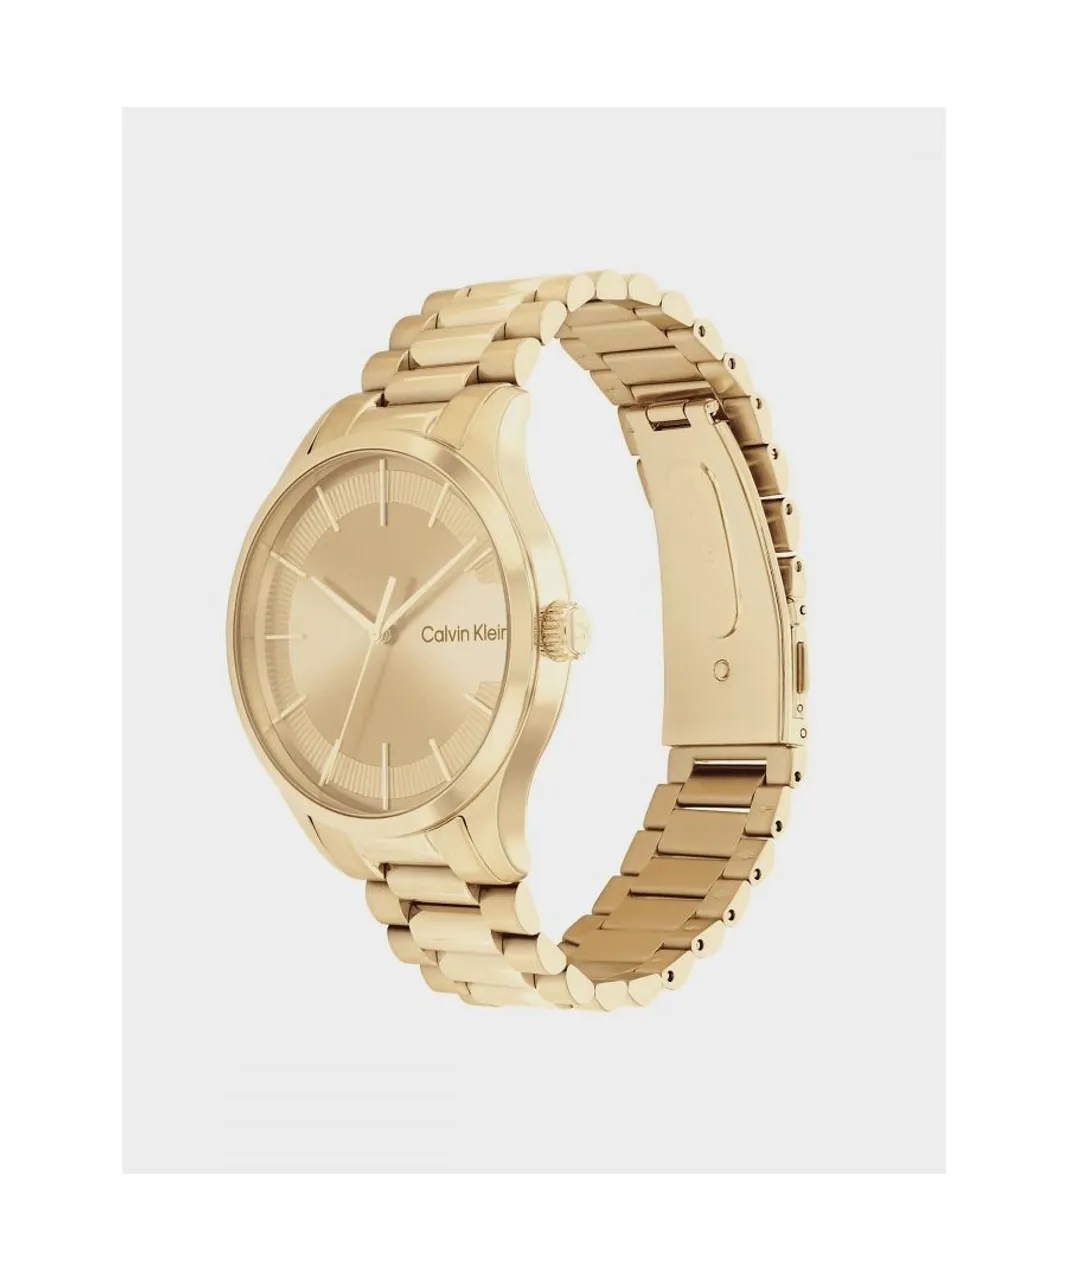 Calvin Klein Mens Accessories Iconic Bracelet Watch in Gold Stainless Steel - One Size